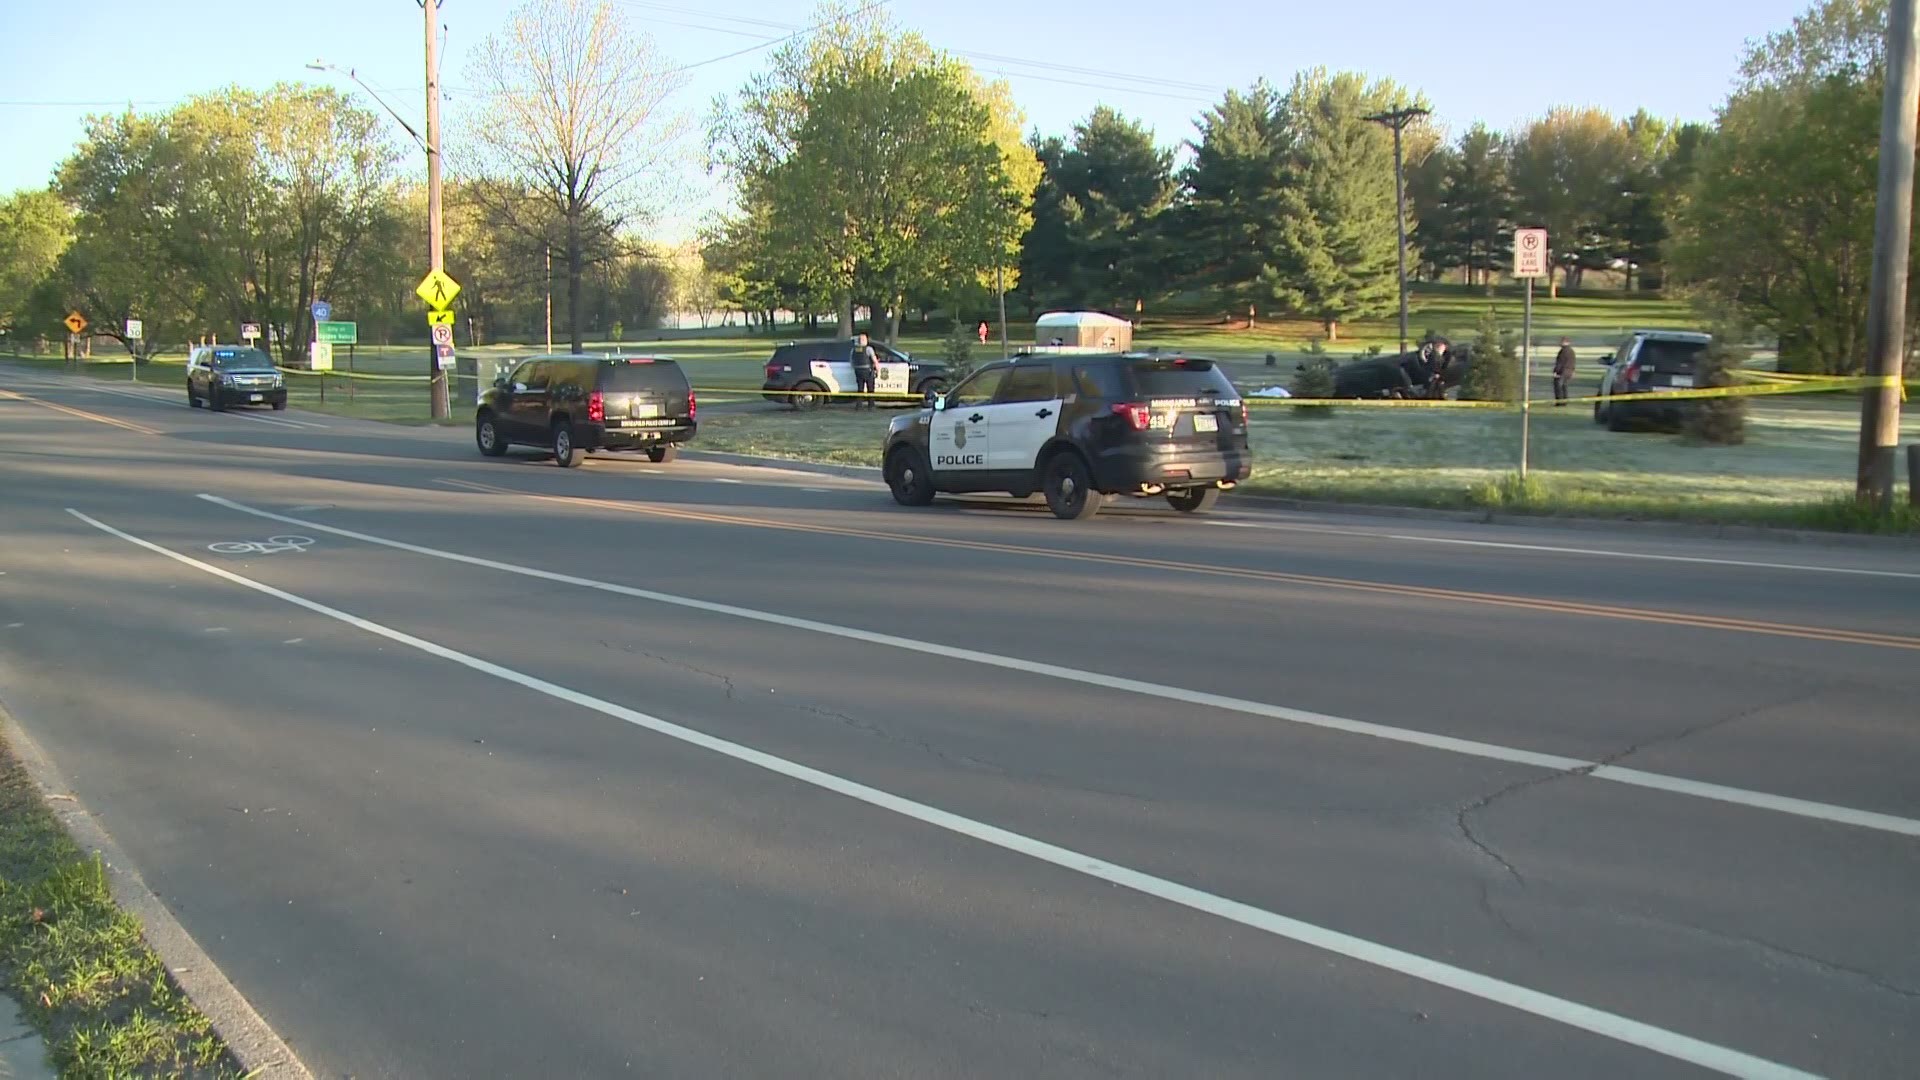 Minneapolis police say a woman in her 30s is deadf after being ejected from her vehicle during a high-speed rollover Tuesday.